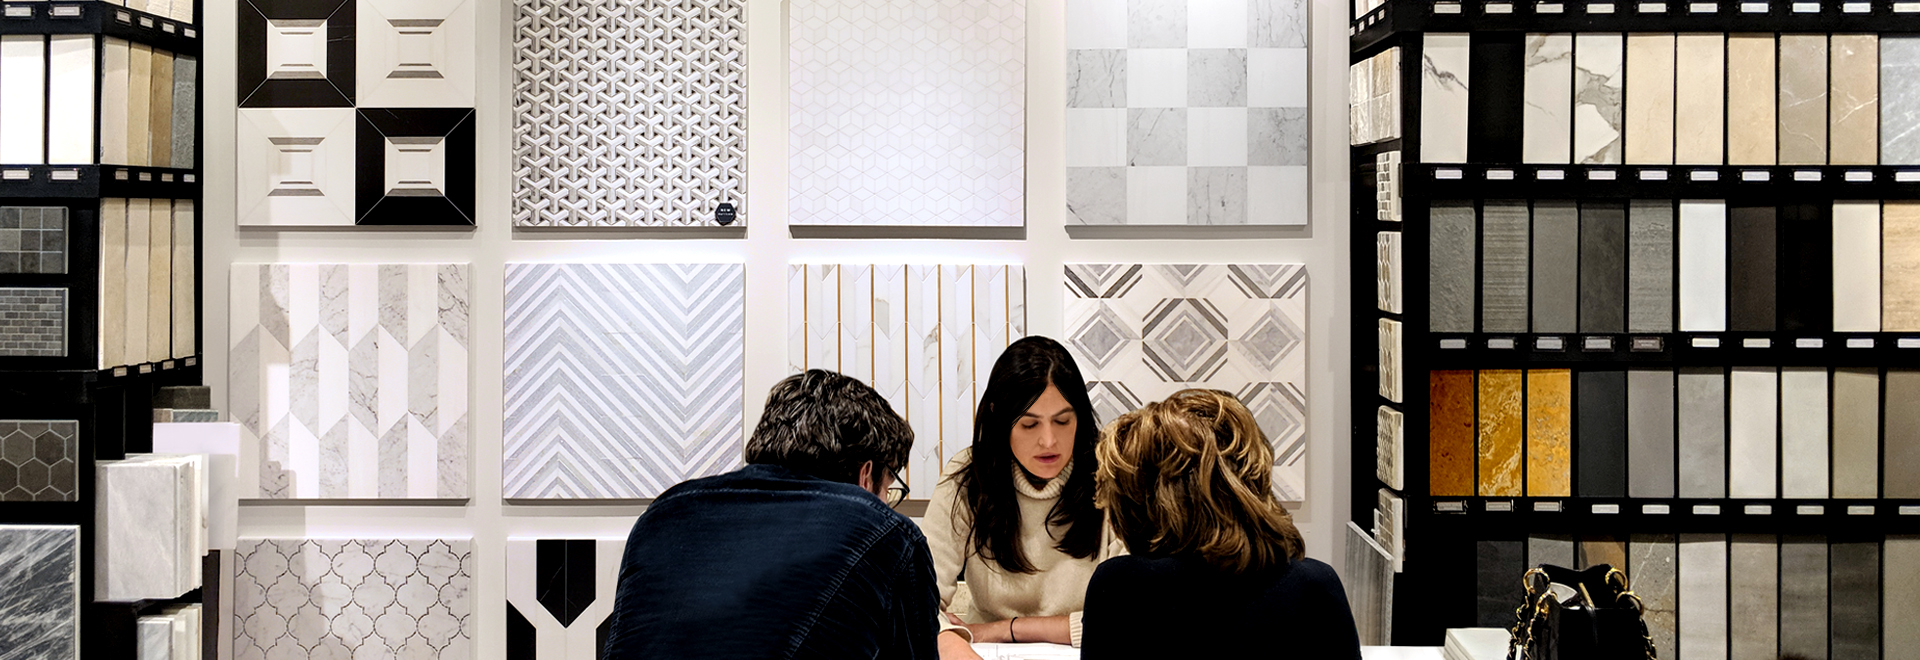 Schedule an appointment to visit the NYC Tile Showroom